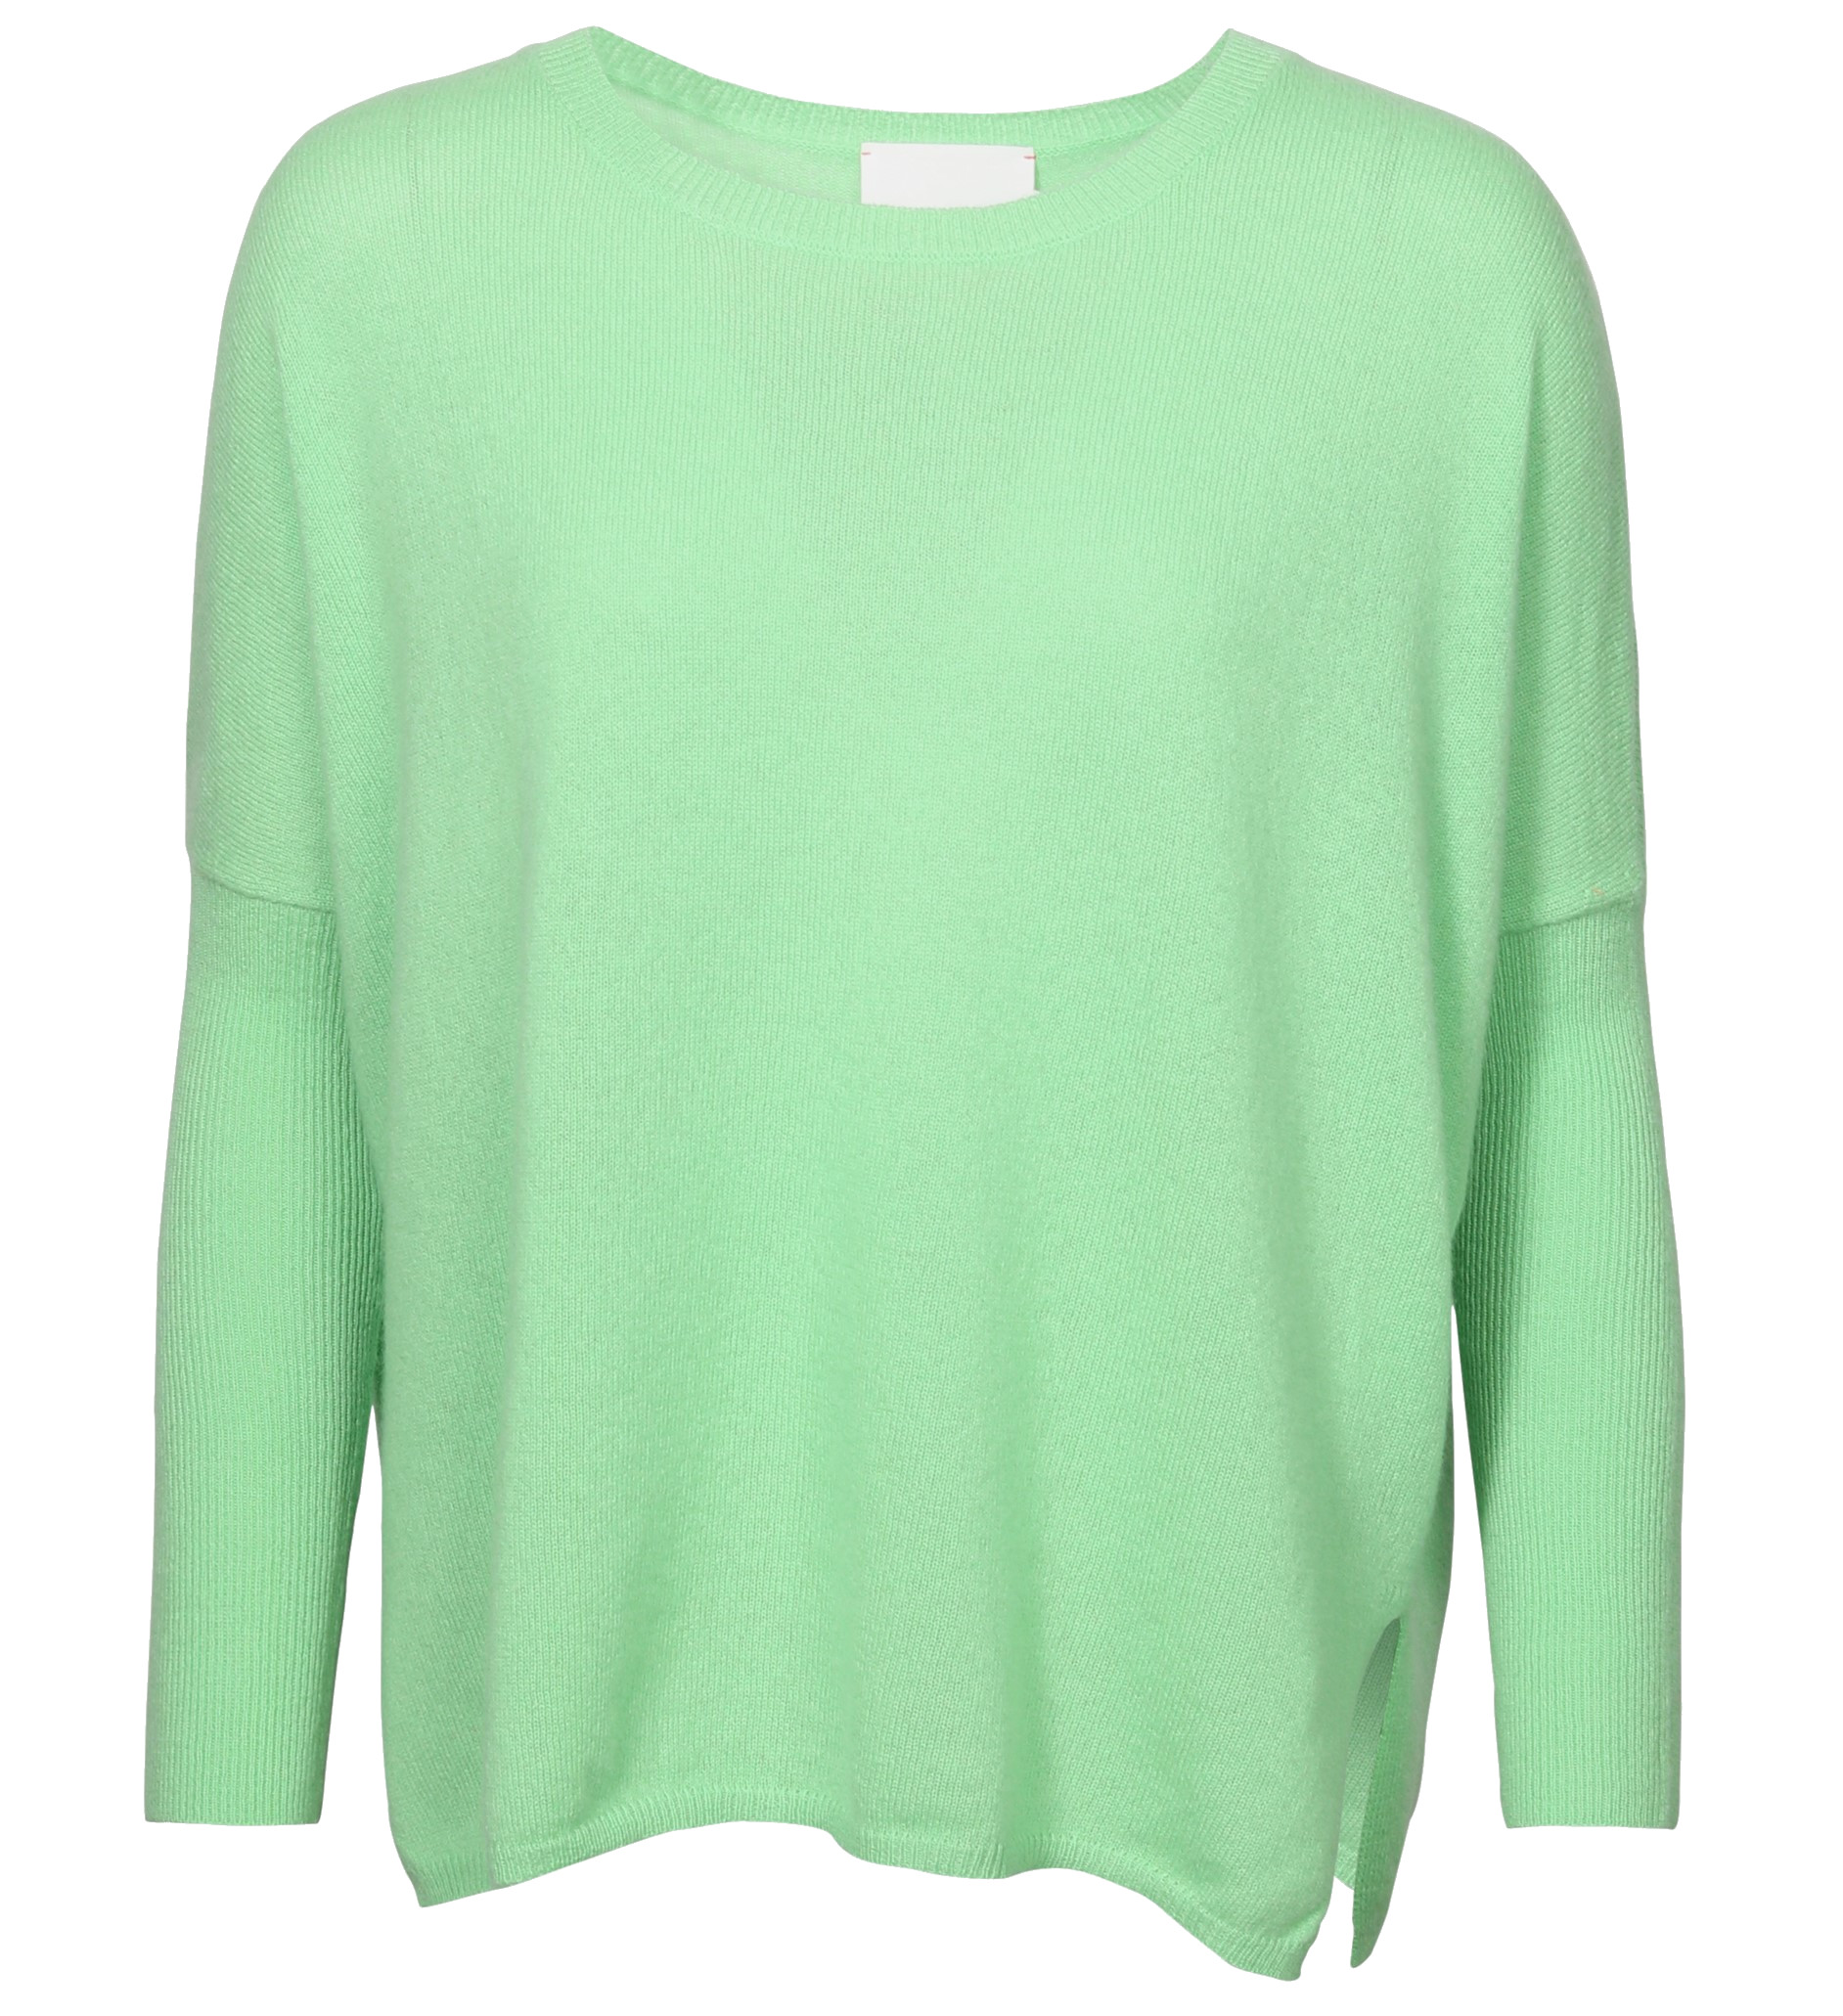 ABSOLUT CASHMERE Poncho Sweater Astrid in Light Green